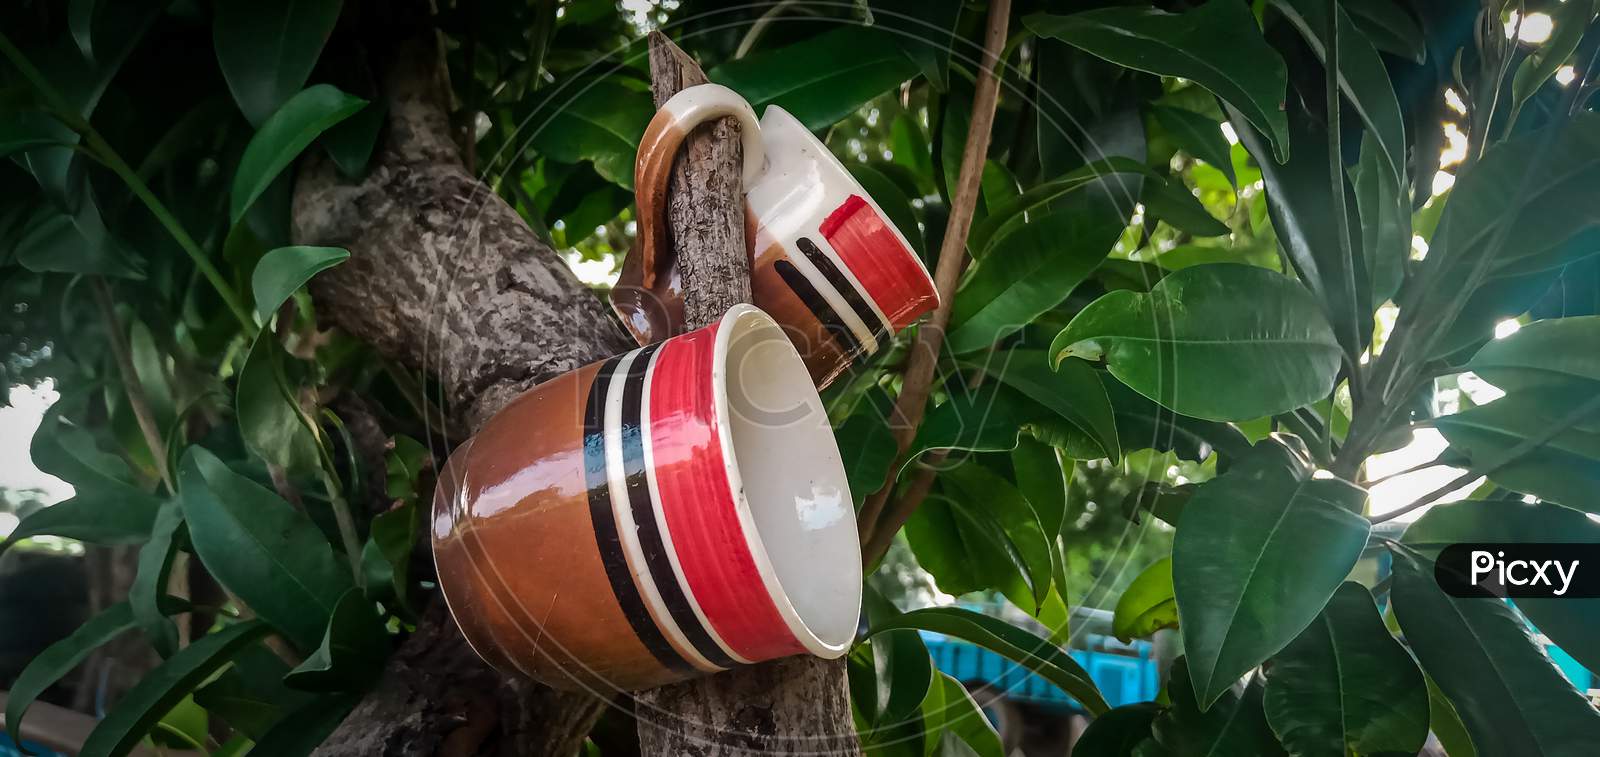 Tea cups hangout on a green plant